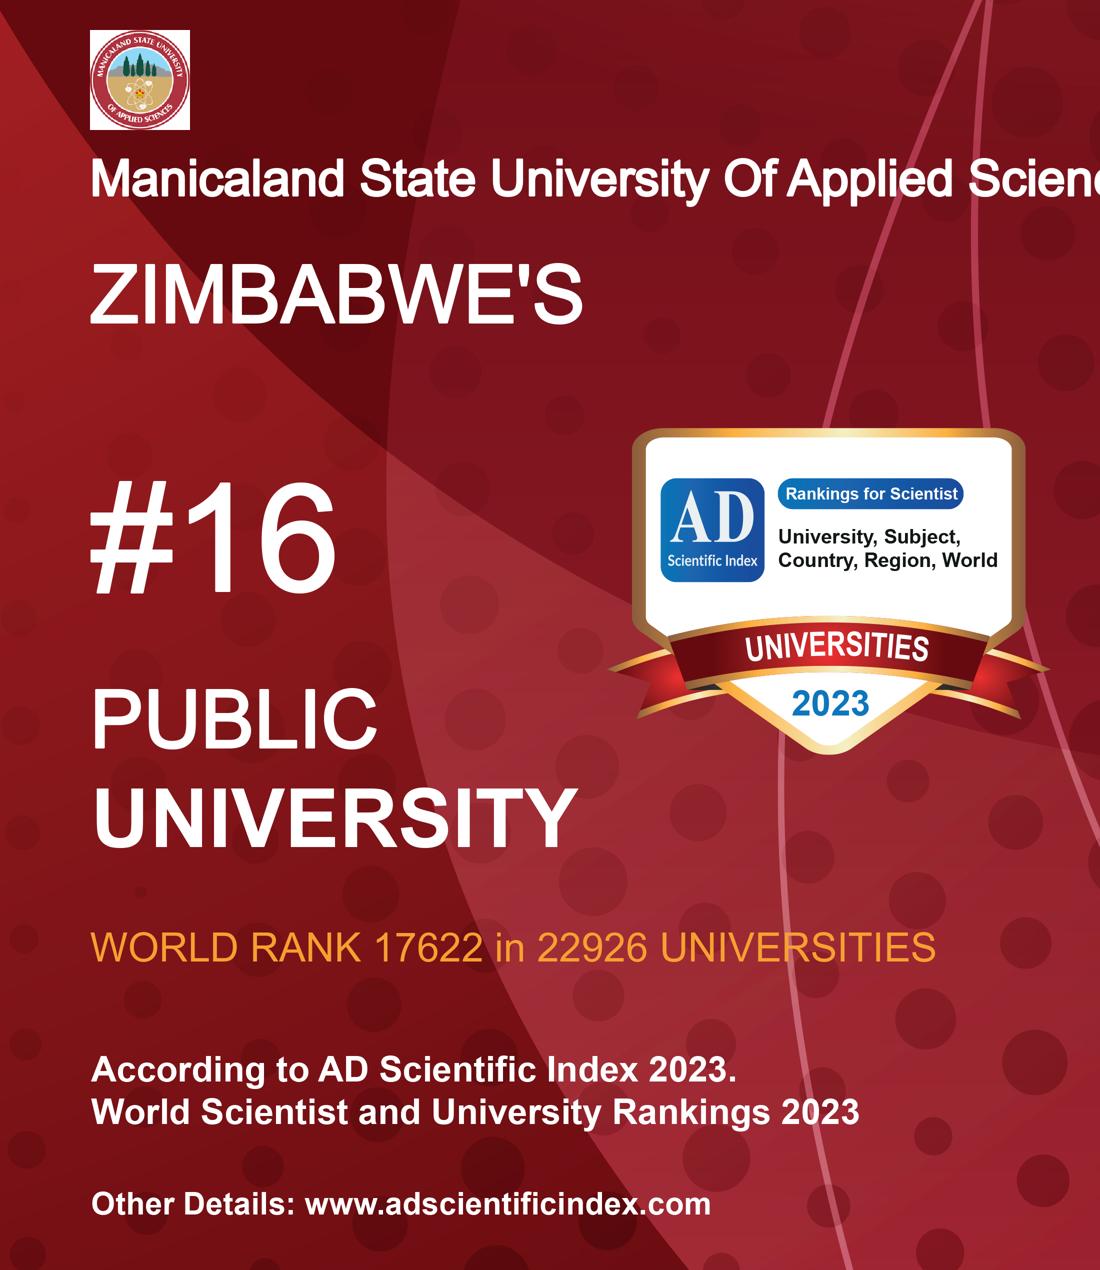 Manicaland State University Of Applied Sciences